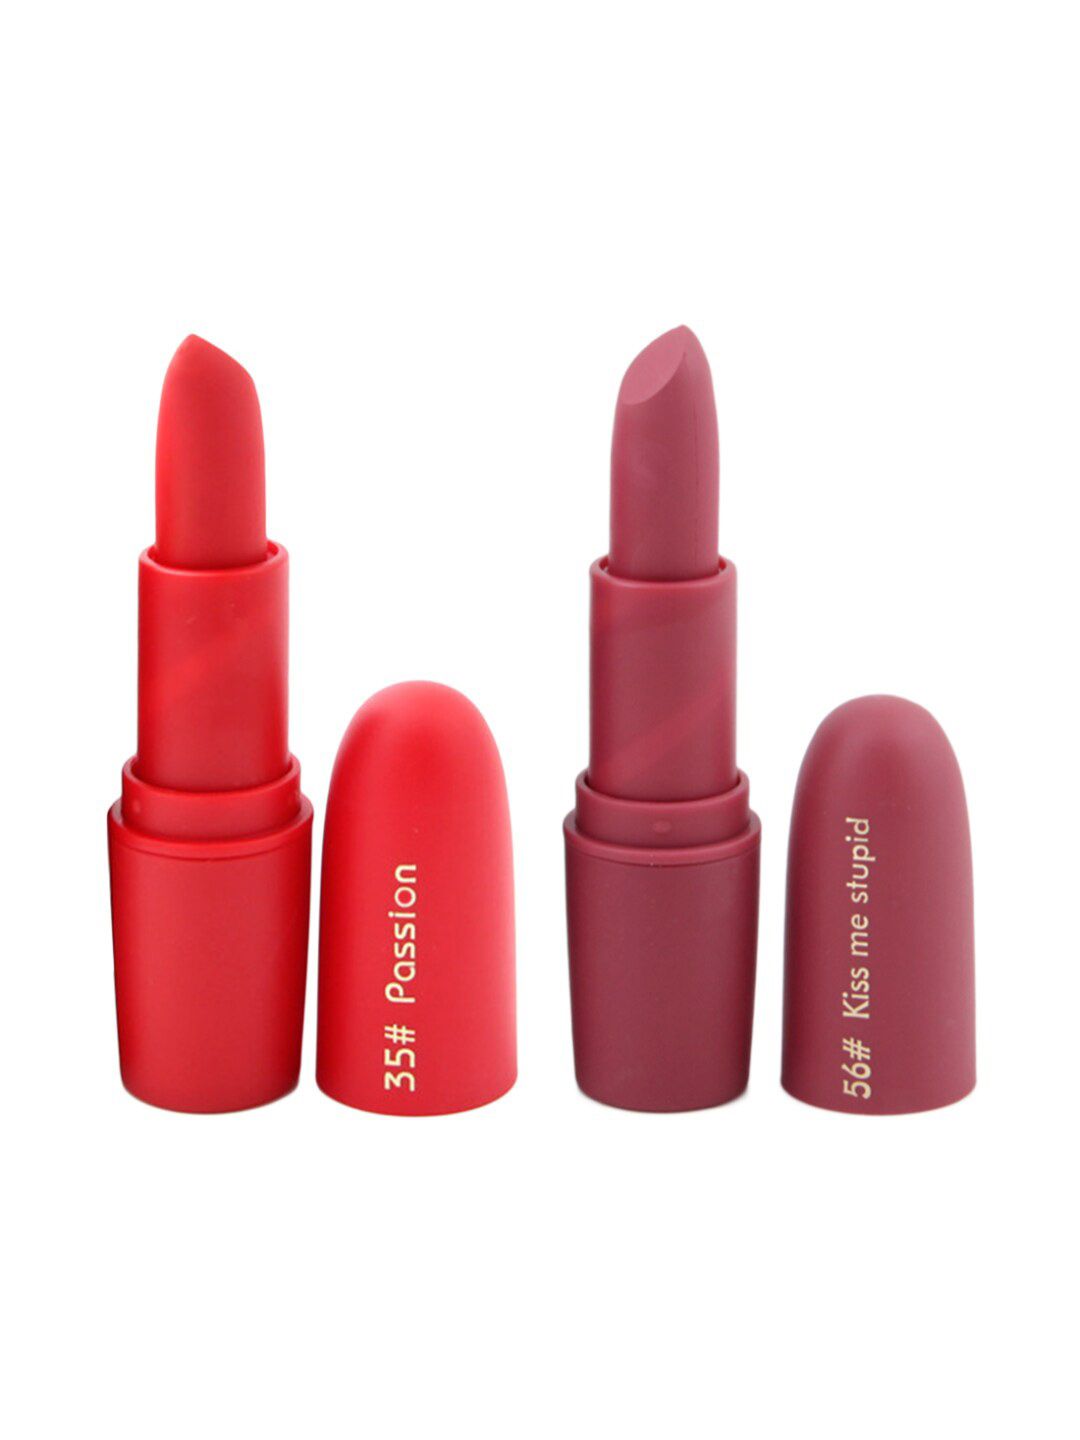 MISS ROSE Professional Make-Up Set of 2 Matte Lipsticks - Passion 35 & Kiss Me Stupid 56 Price in India